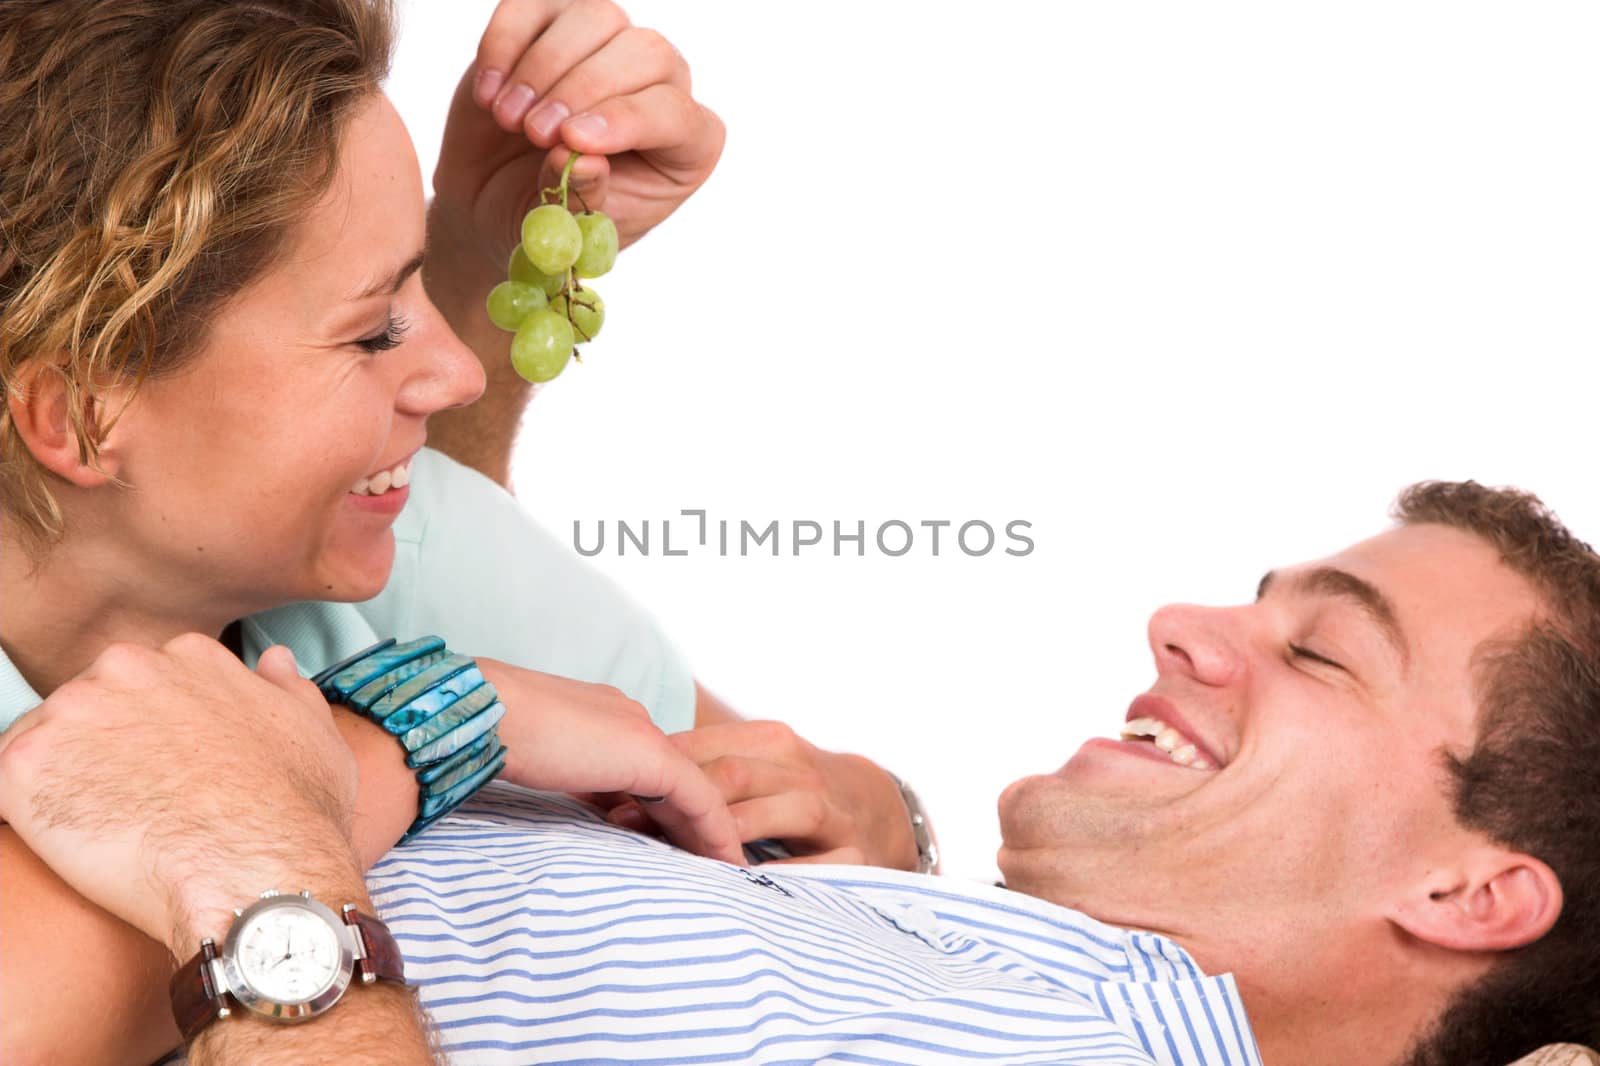 Teasing with grapes by Fotosmurf